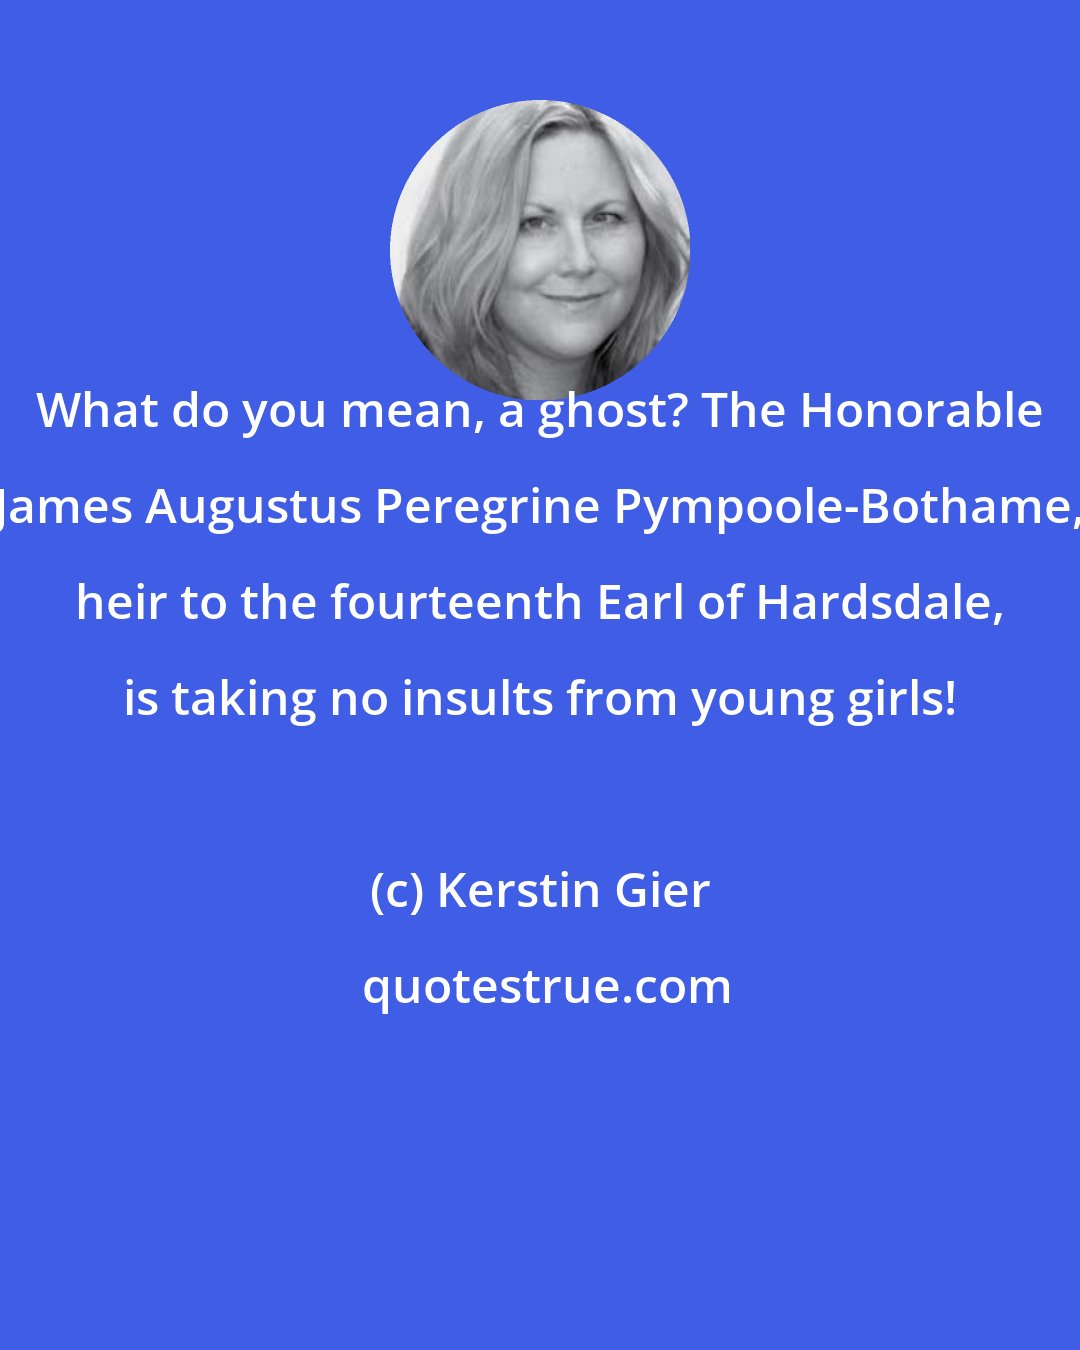 Kerstin Gier: What do you mean, a ghost? The Honorable James Augustus Peregrine Pympoole-Bothame, heir to the fourteenth Earl of Hardsdale, is taking no insults from young girls!